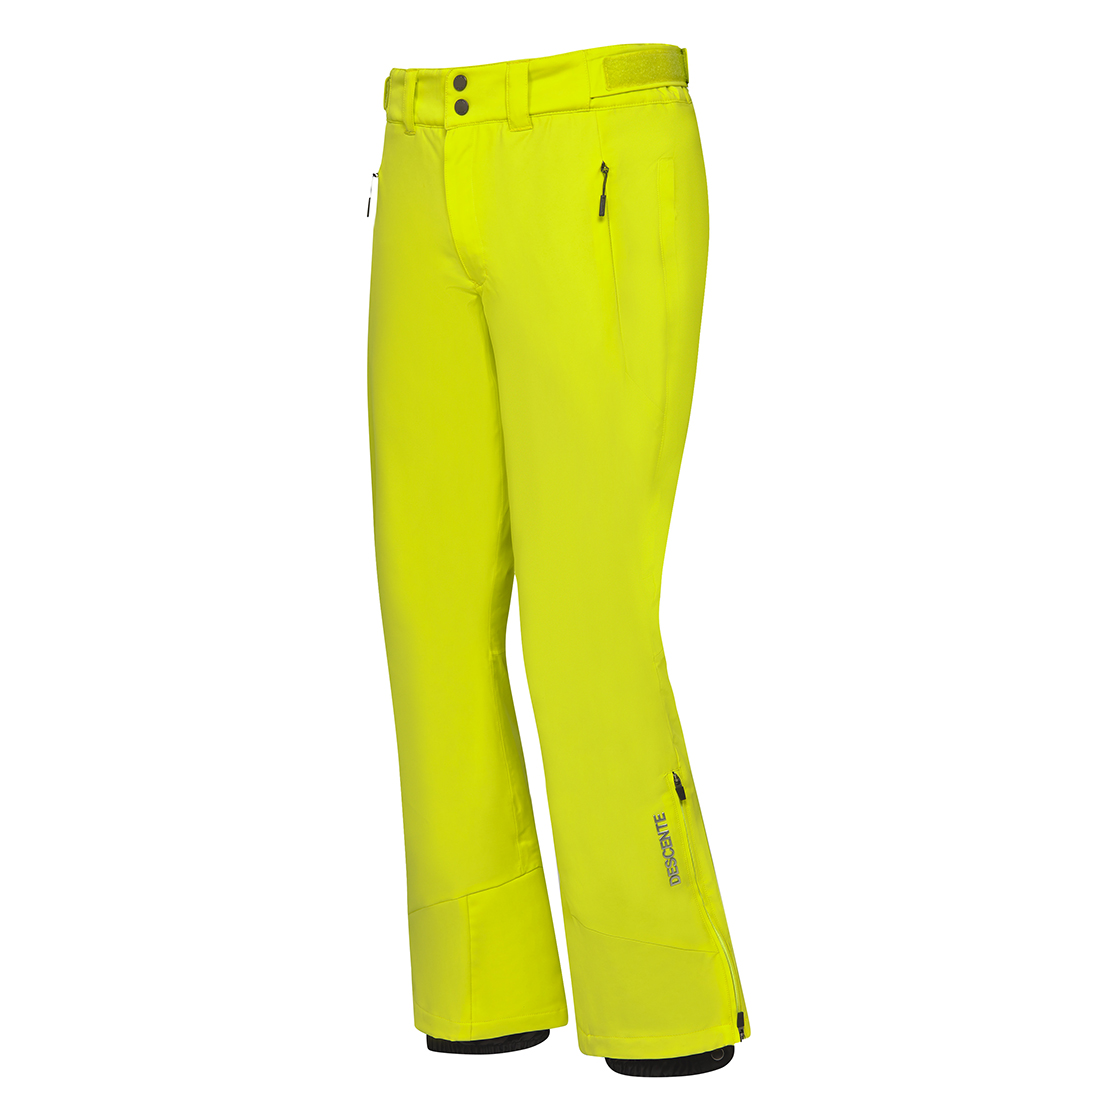 30G INSULATED PANTS